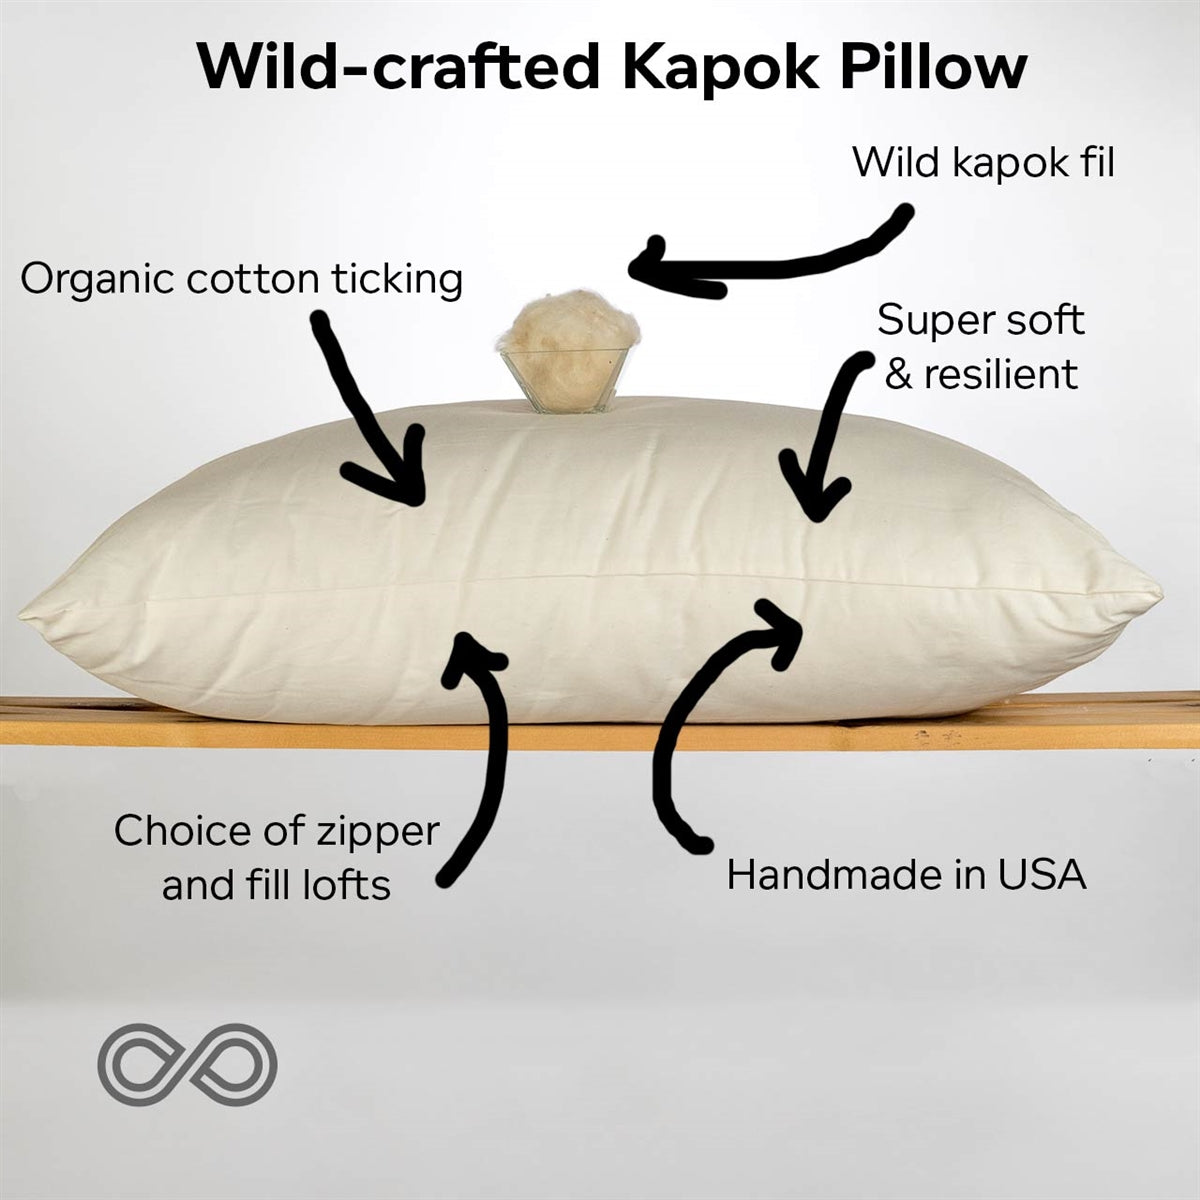 Organic Cotton Bed Pillow Made in USA (Hypoallergenic; Chemical-free) –  Rawganique